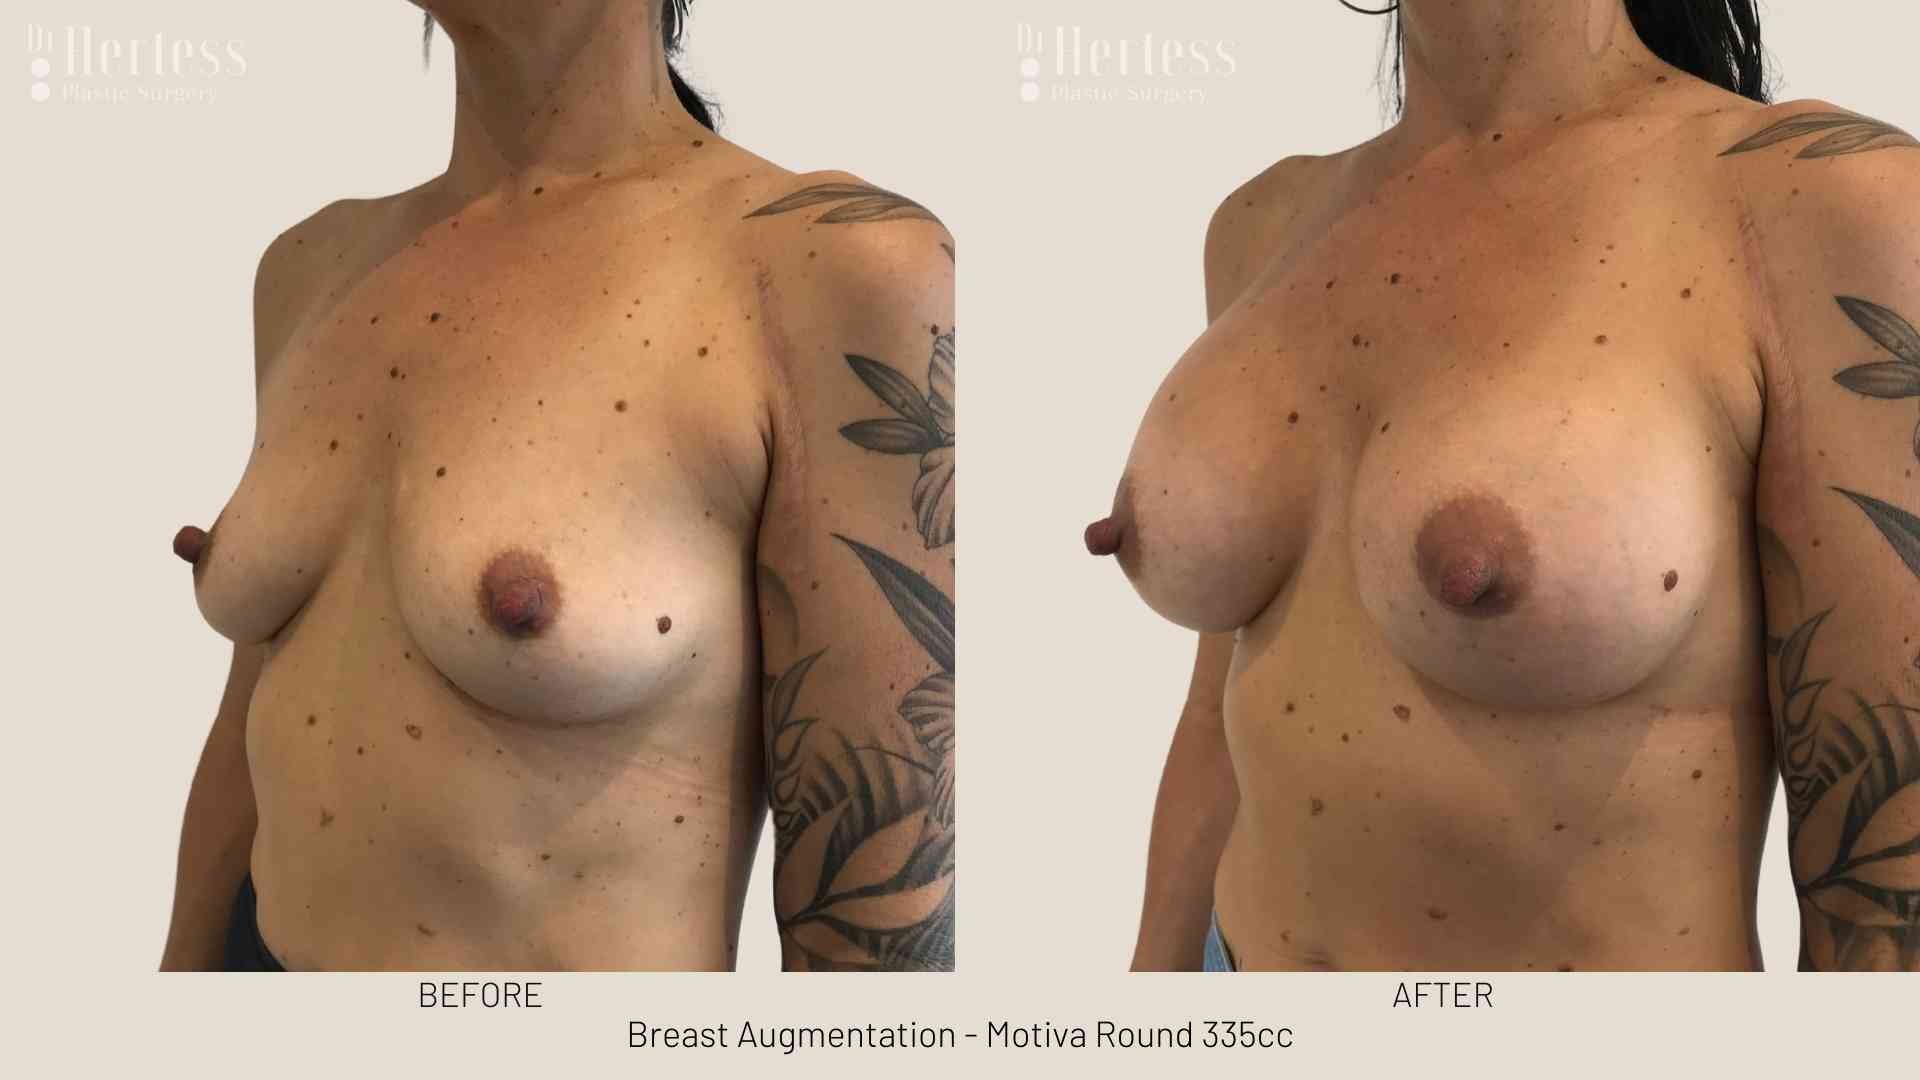 before and after augmentation